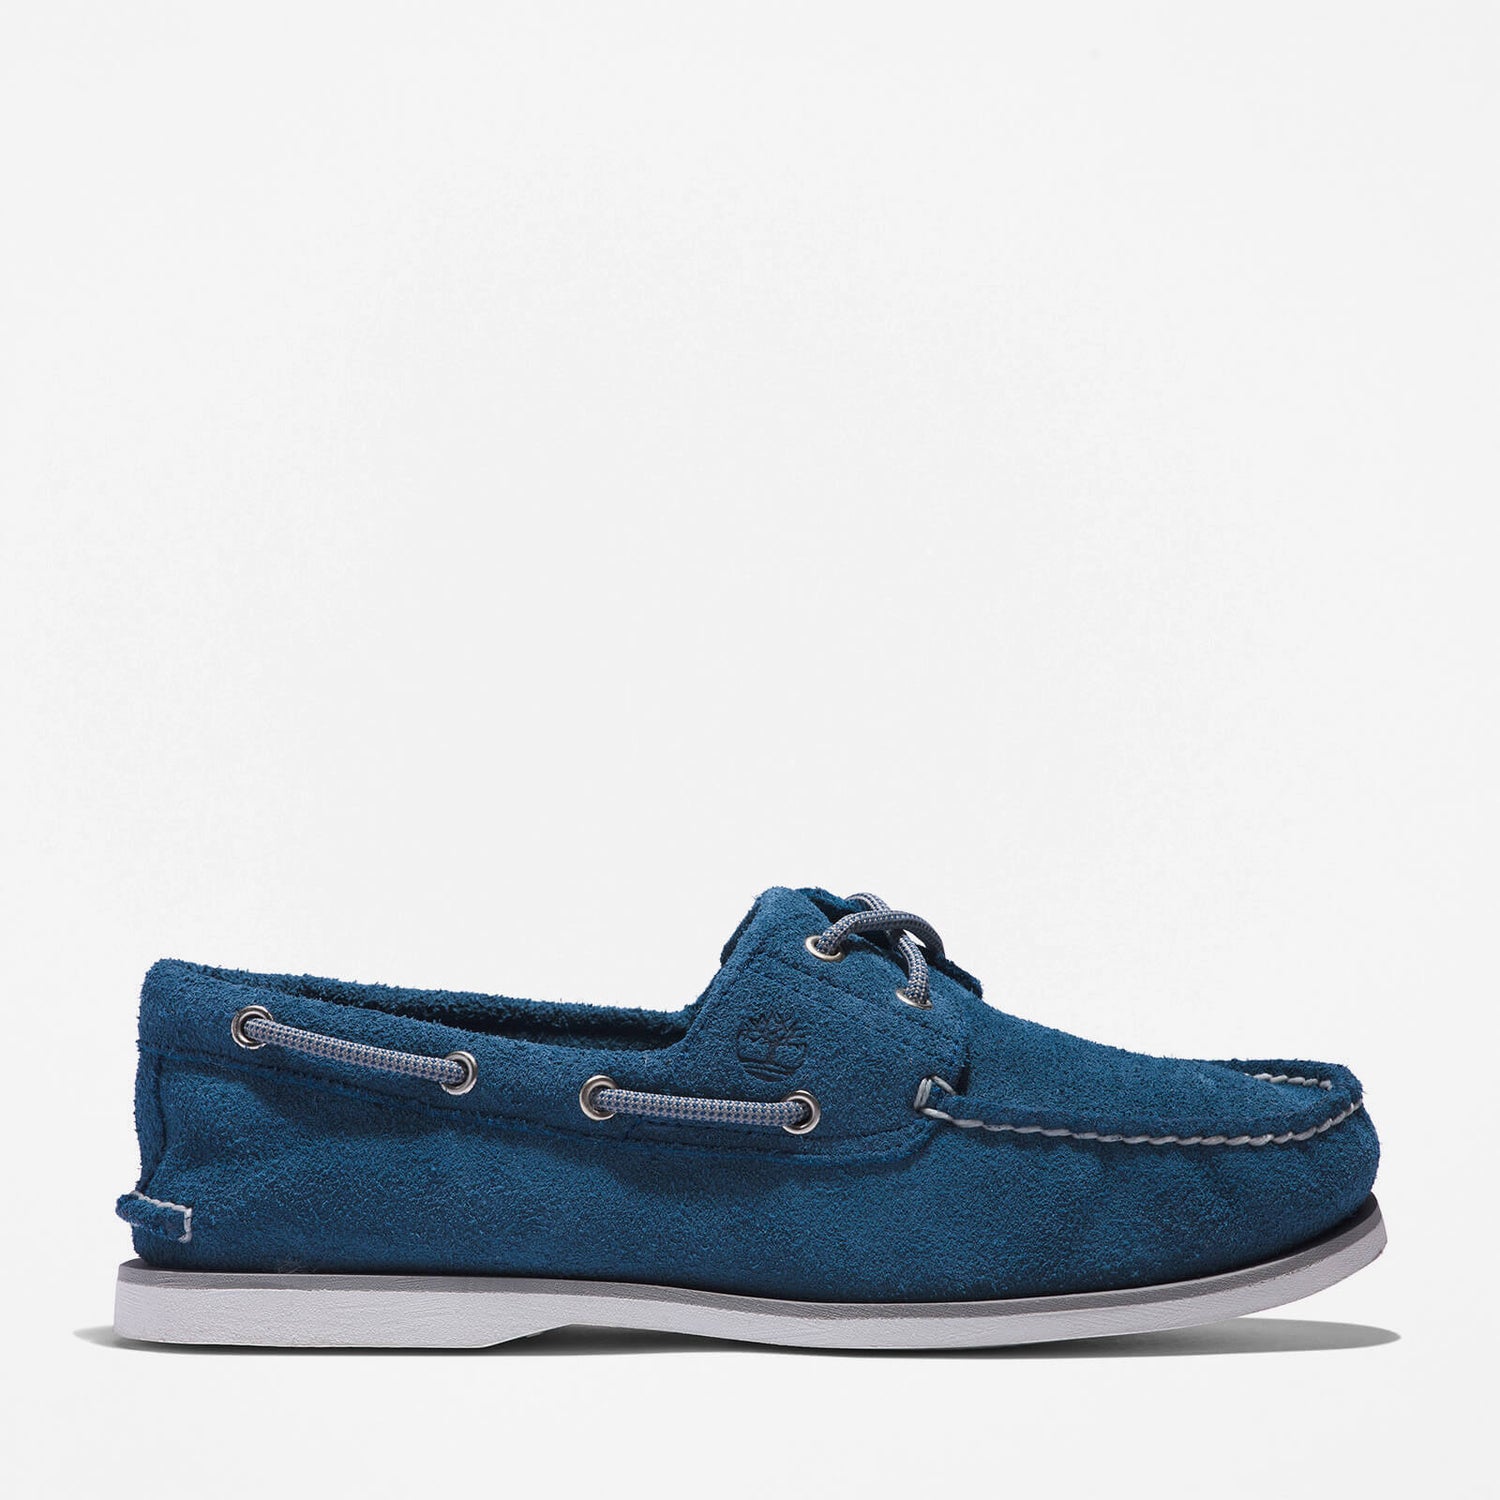 Timberland Men's Classic 2-Eye Suede Boat Shoes - Dark Blue - UK 7